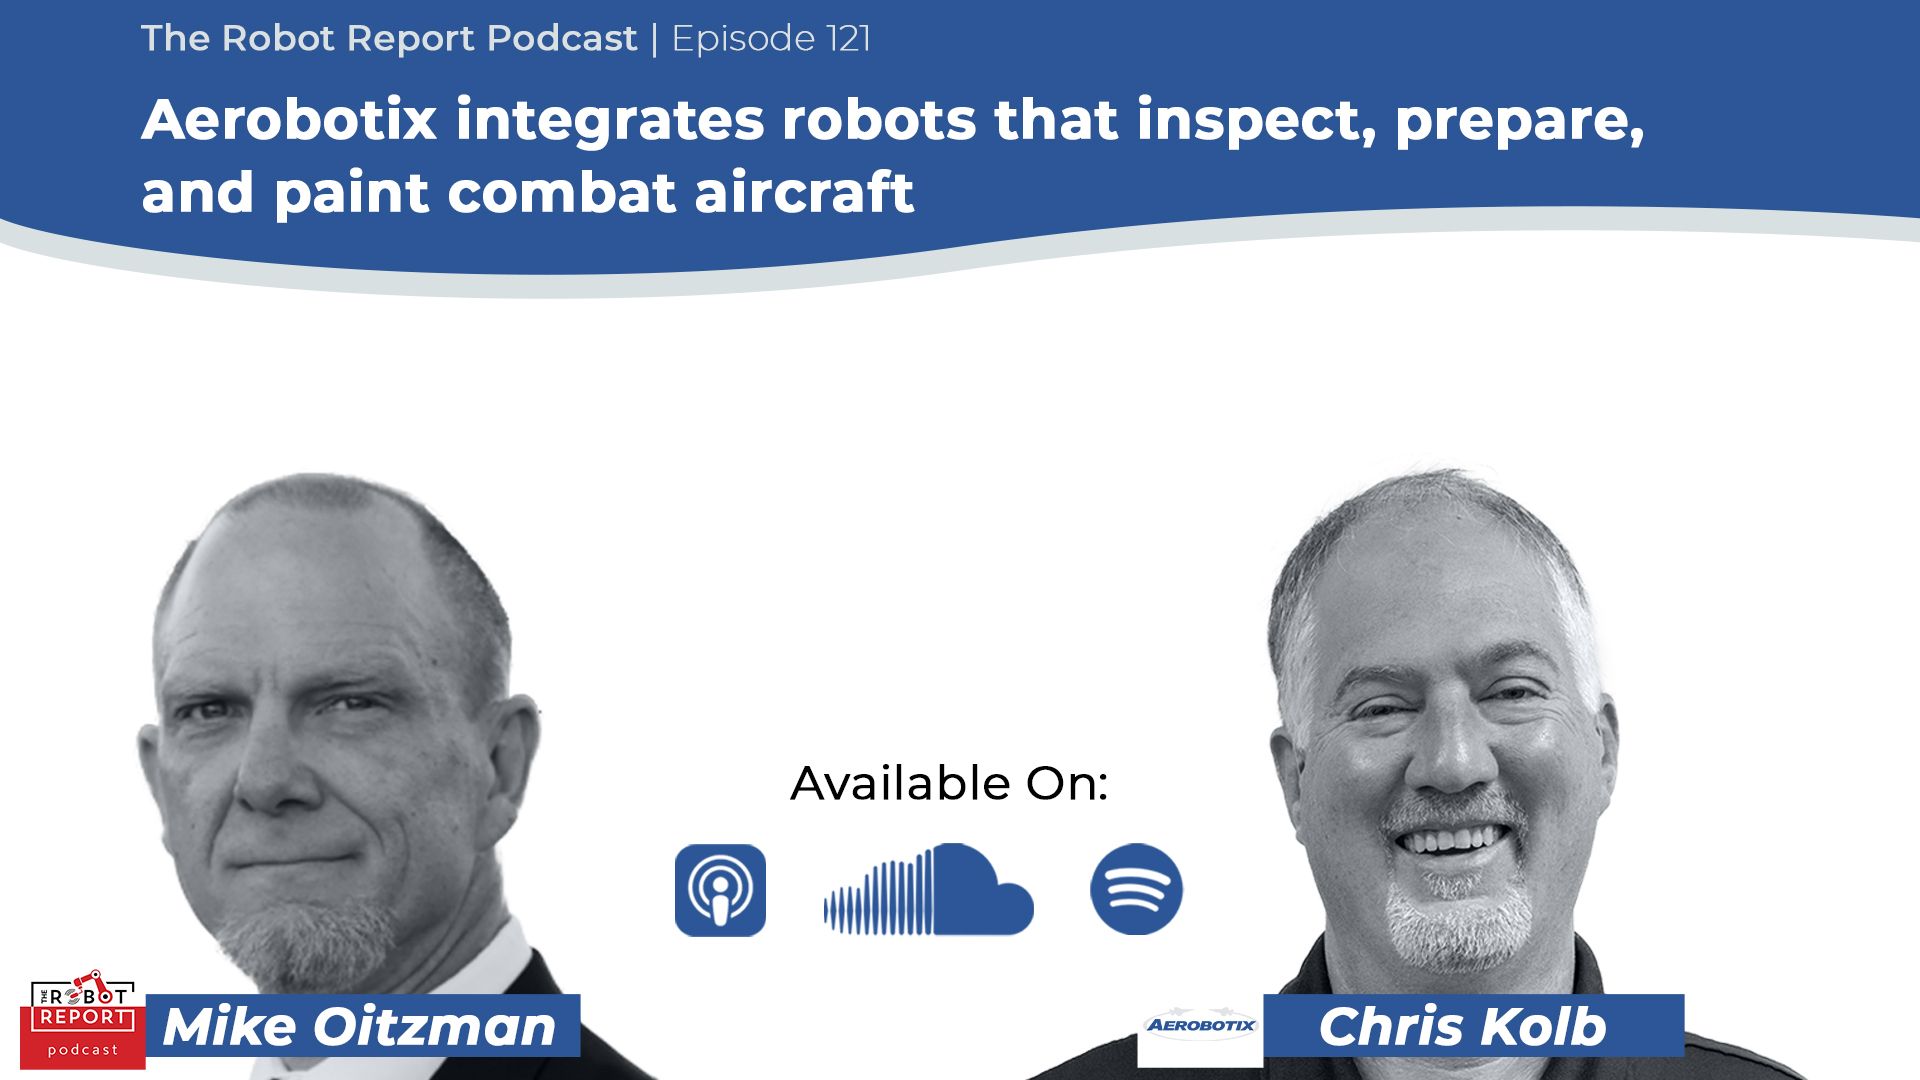 Chris Kolb, Vice President of Sales at Aerobotix, is interview by Mike Oitzman, host of The Robot Report Podcast.